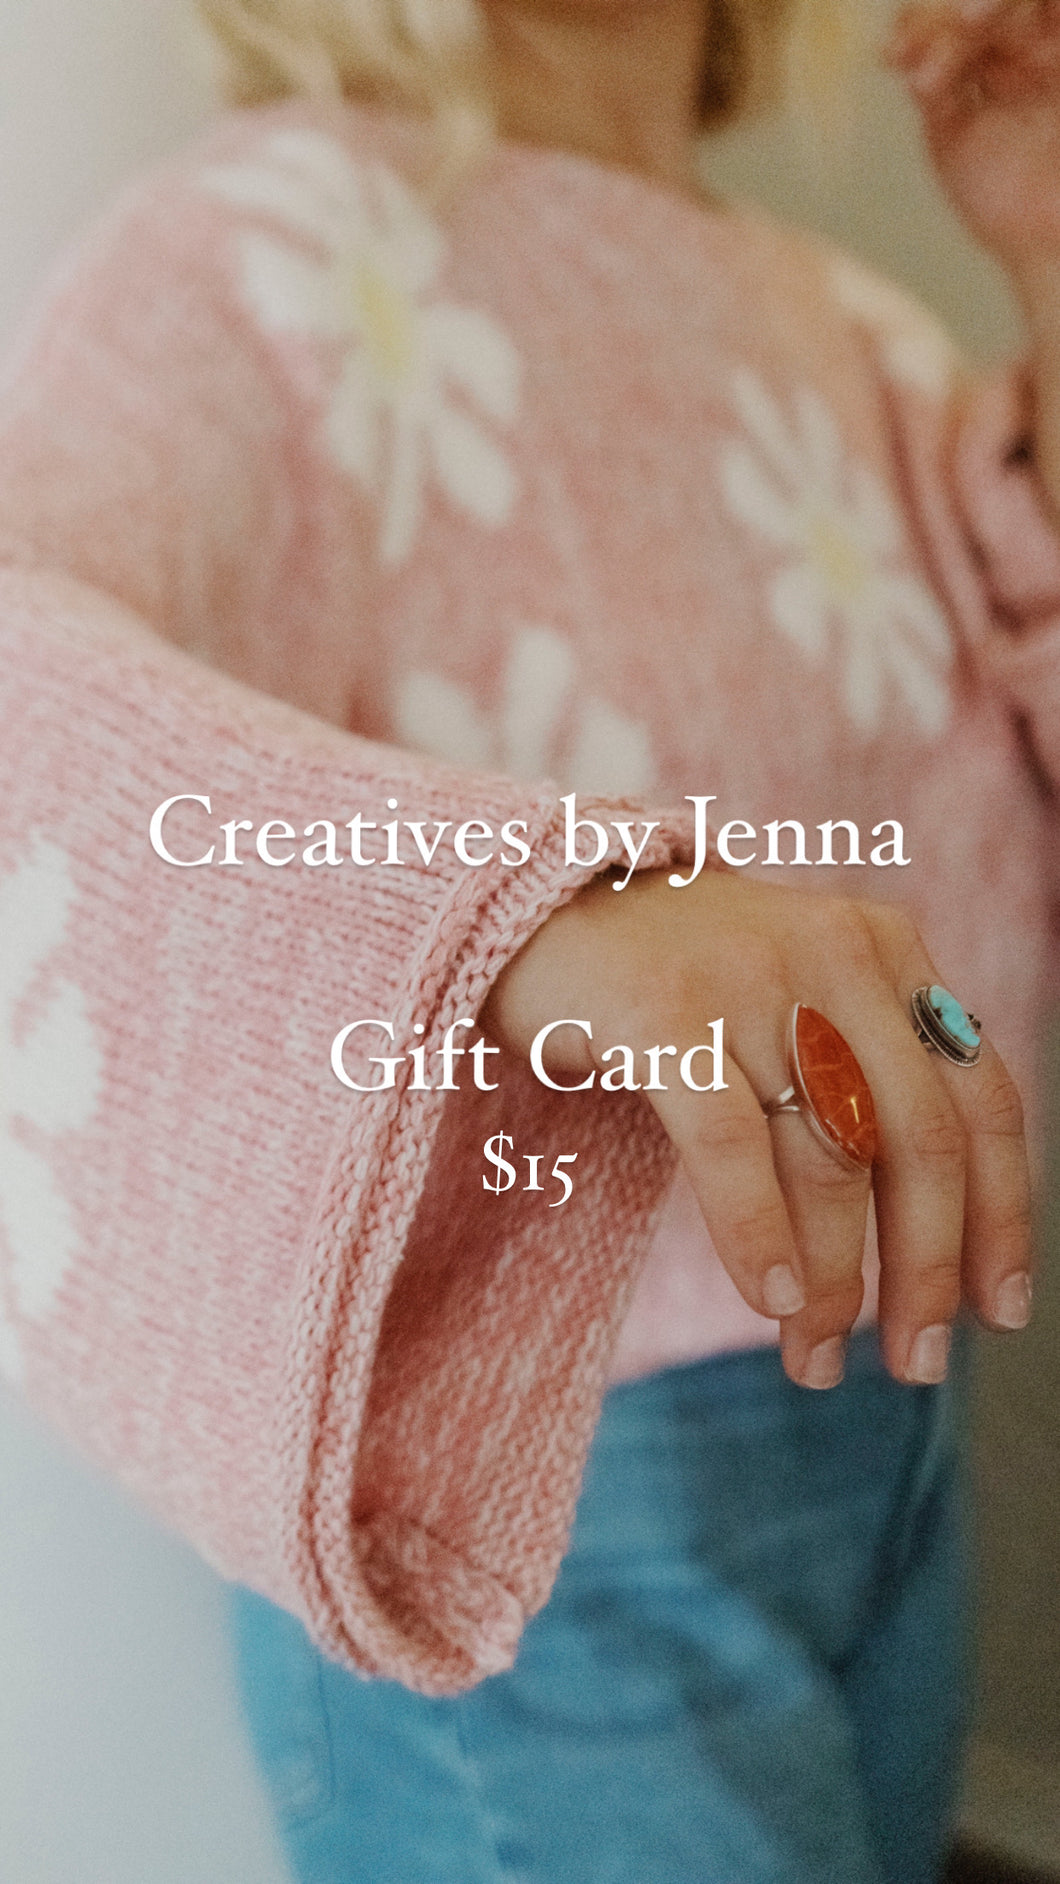 Creatives by Jenna Giftcard